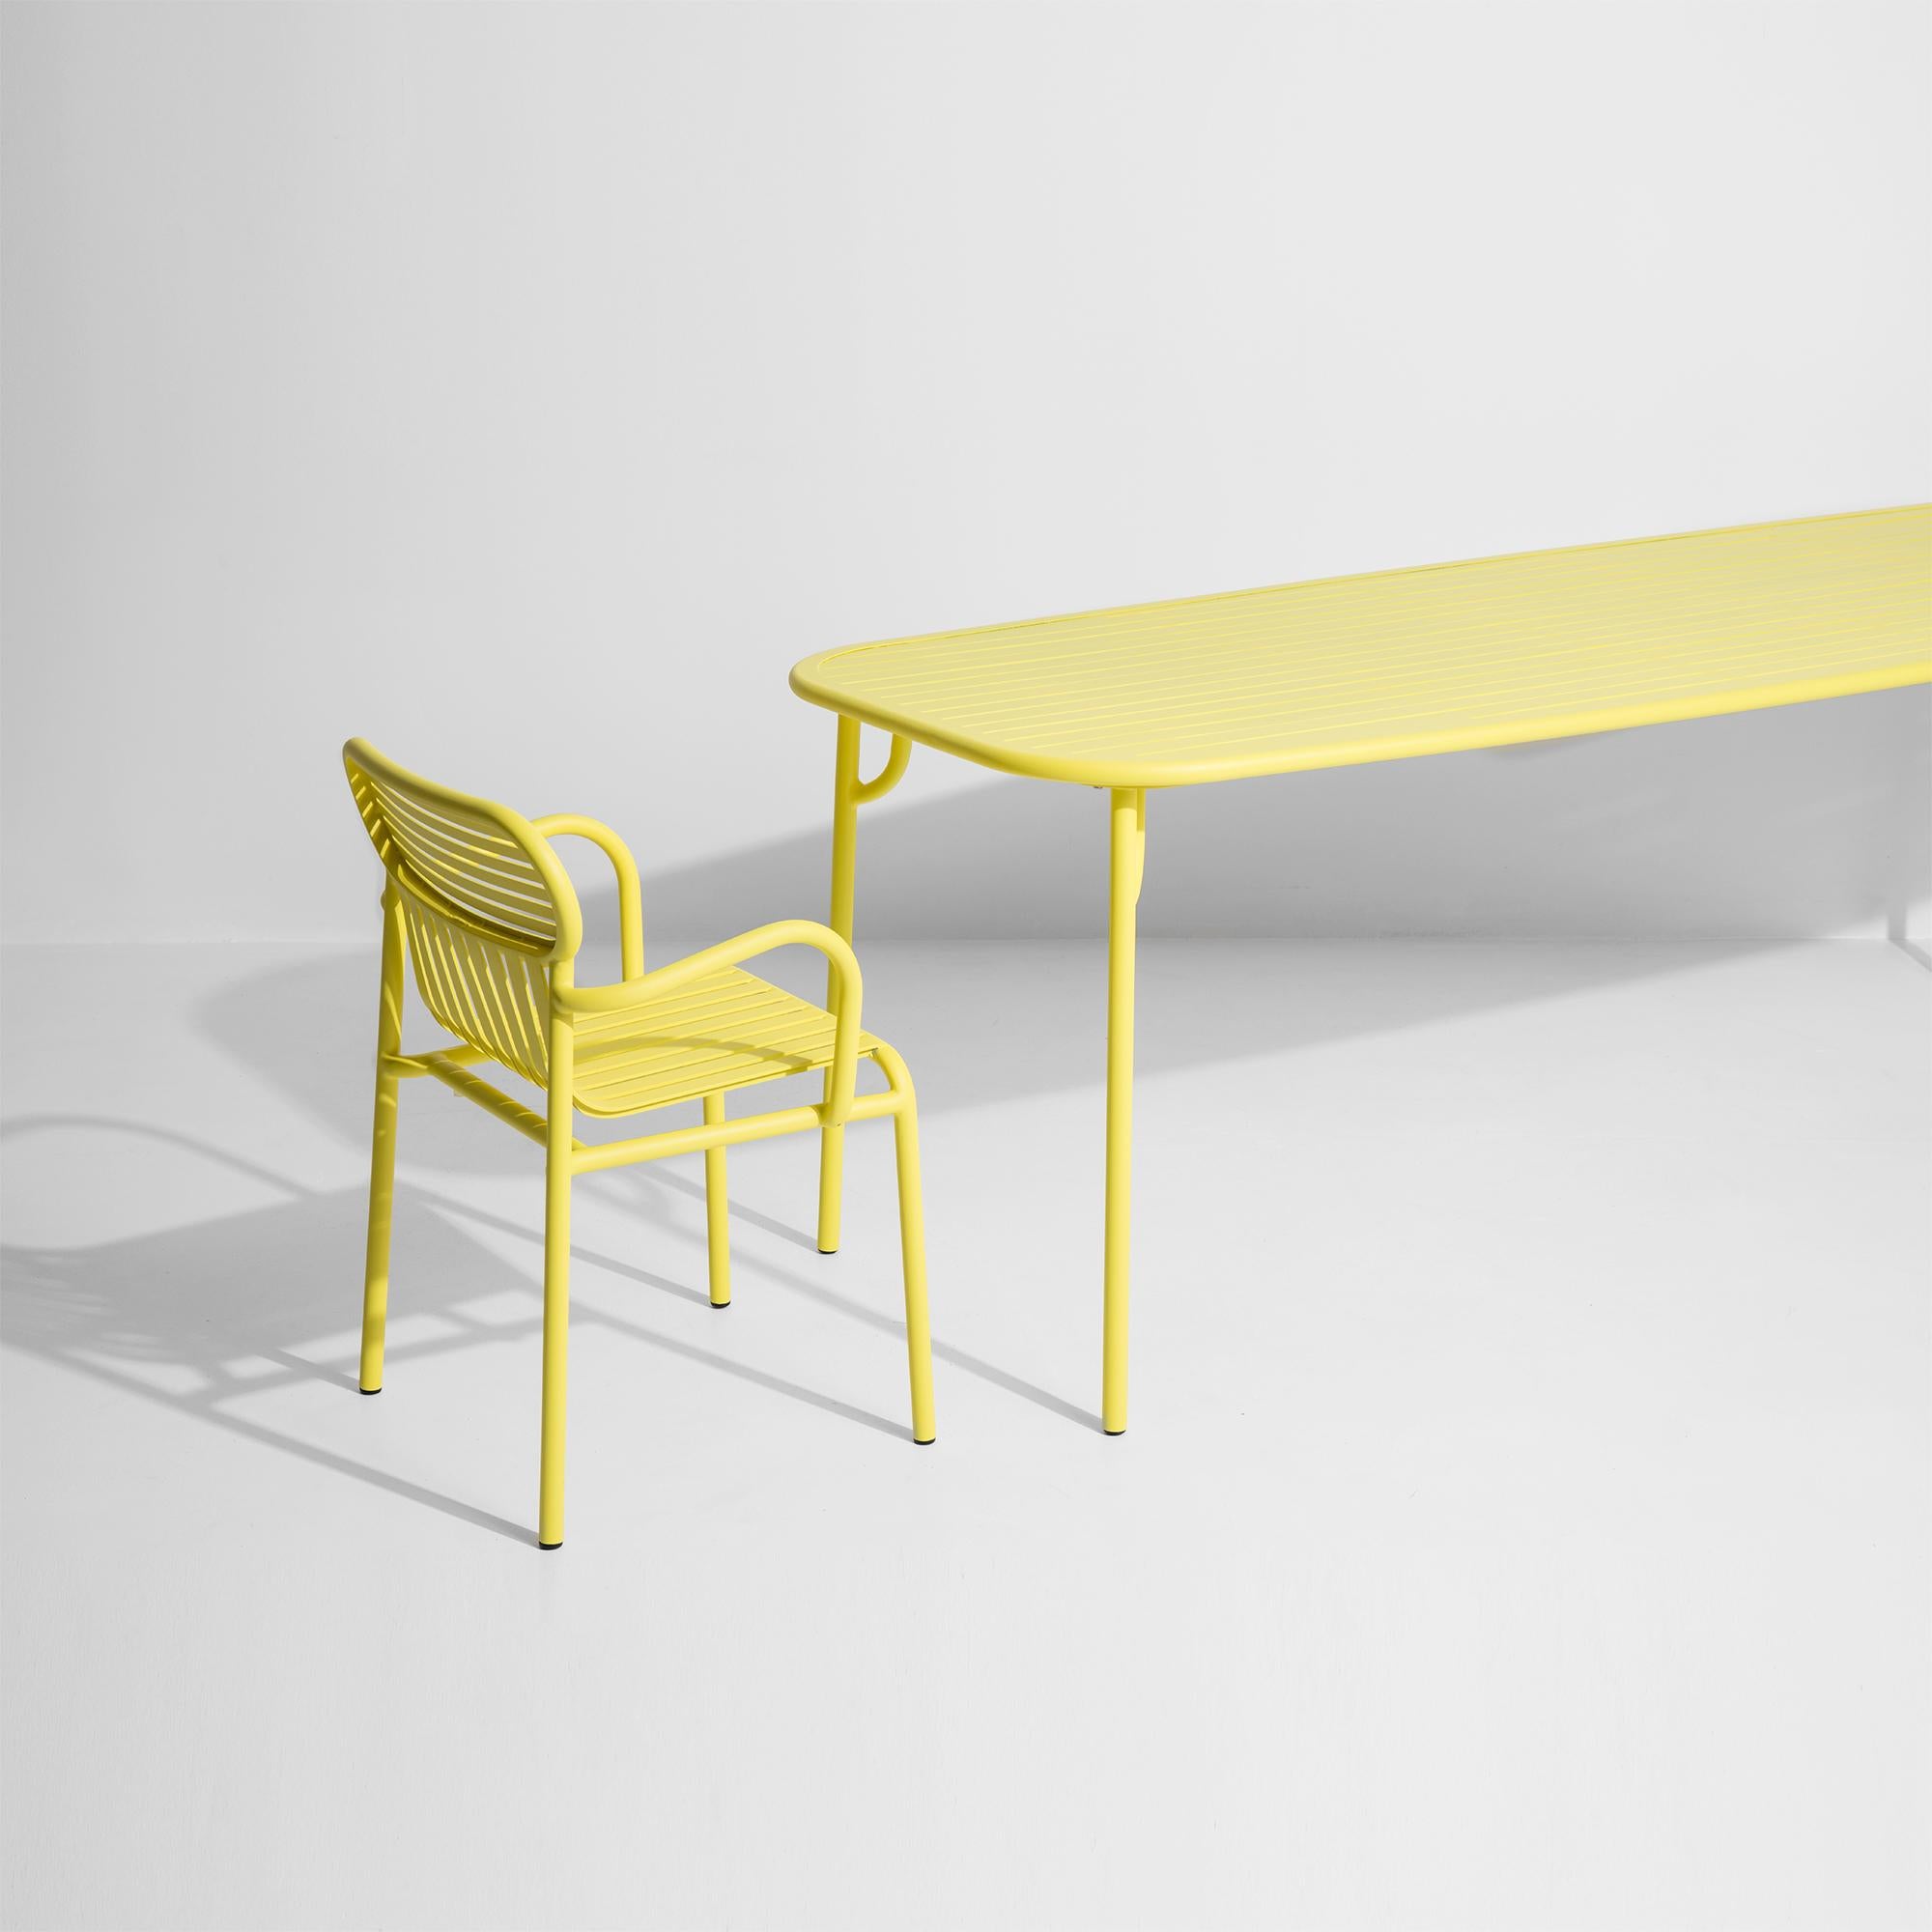 Petite Friture Week-End Large Rectangular Dining Table in Saffron with Slats For Sale 2